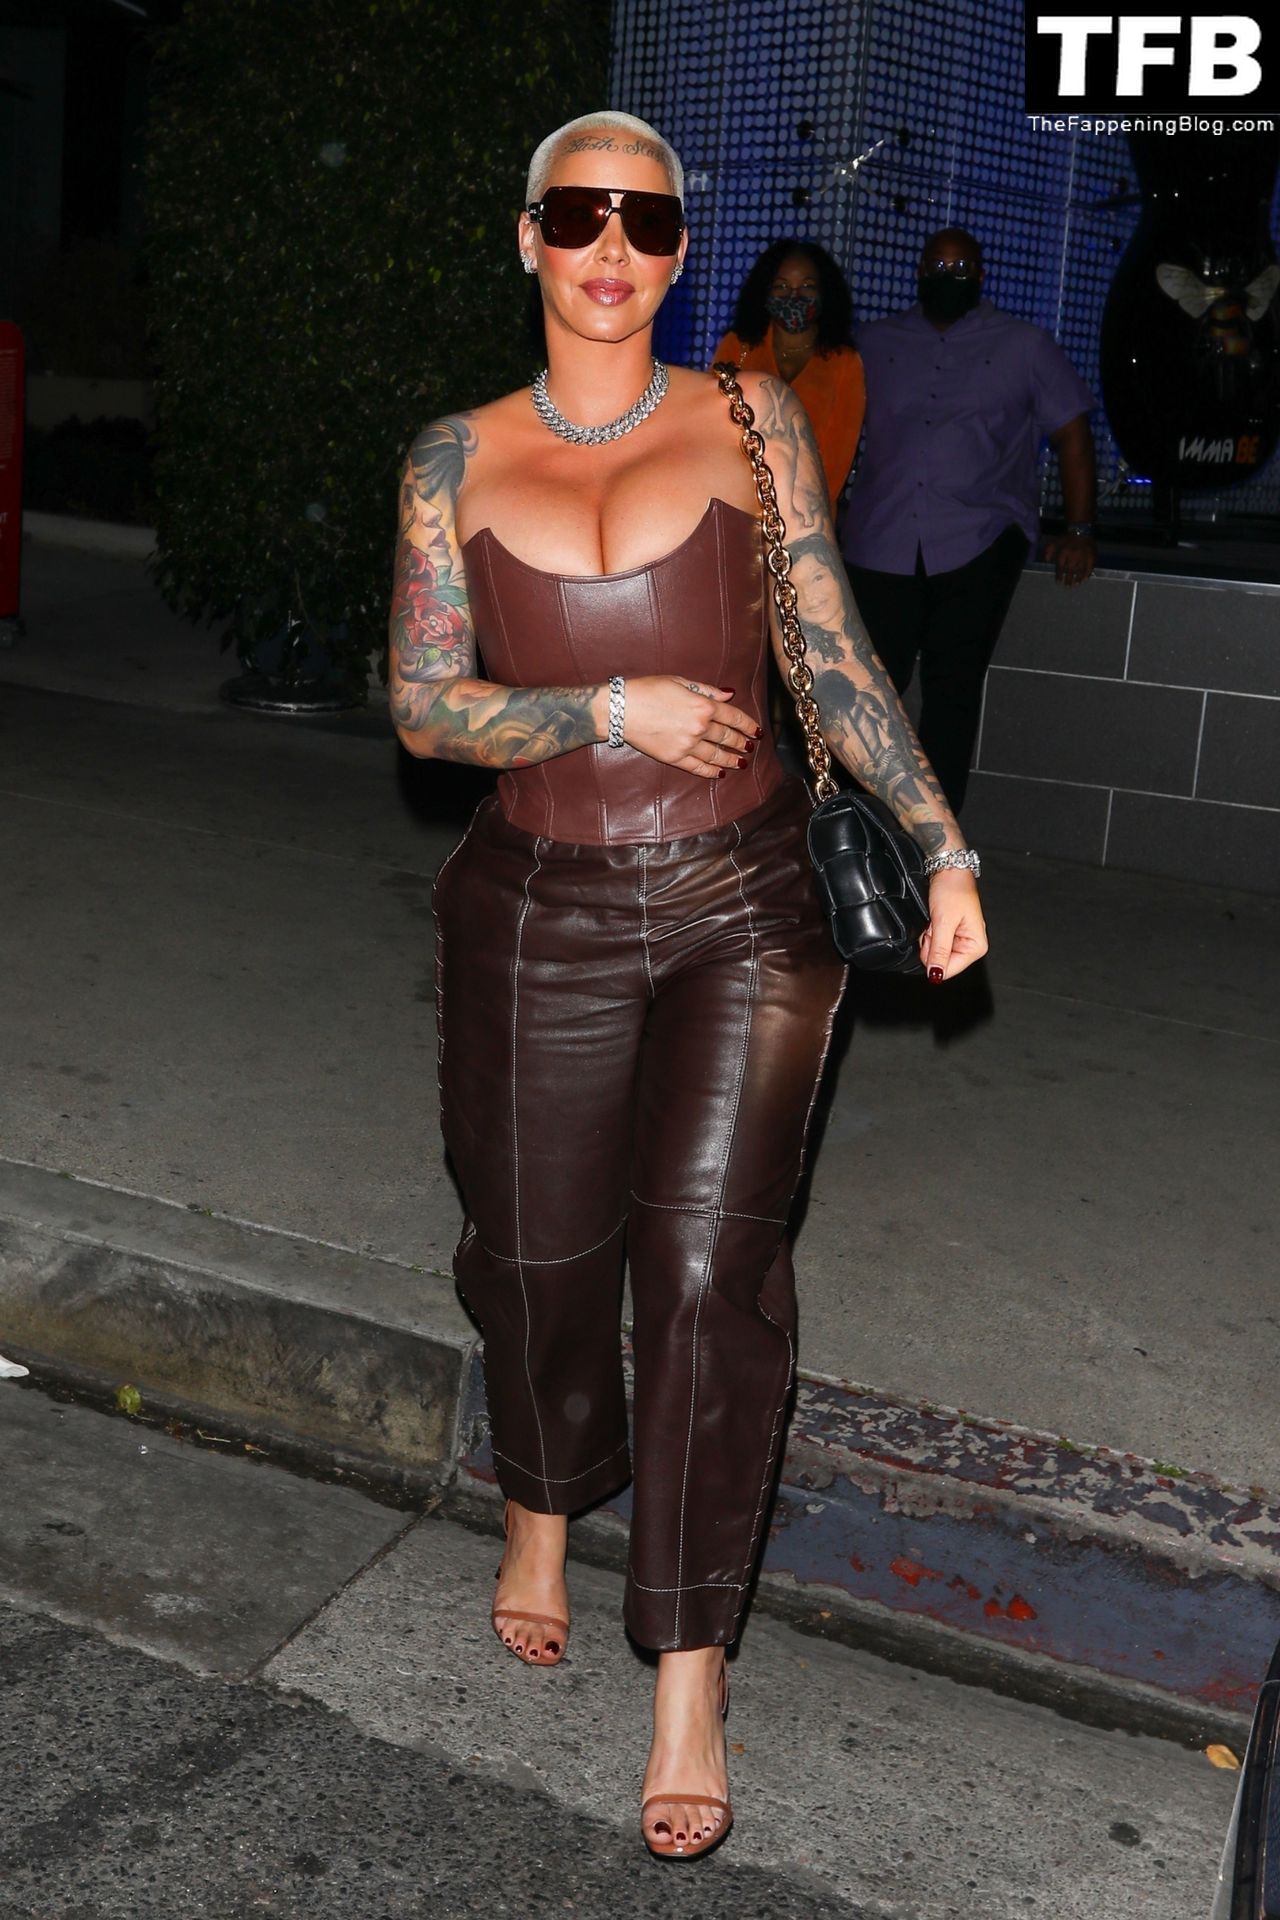 Amber-Rose-Sexy-The-Fappening-Blog-27.jpg